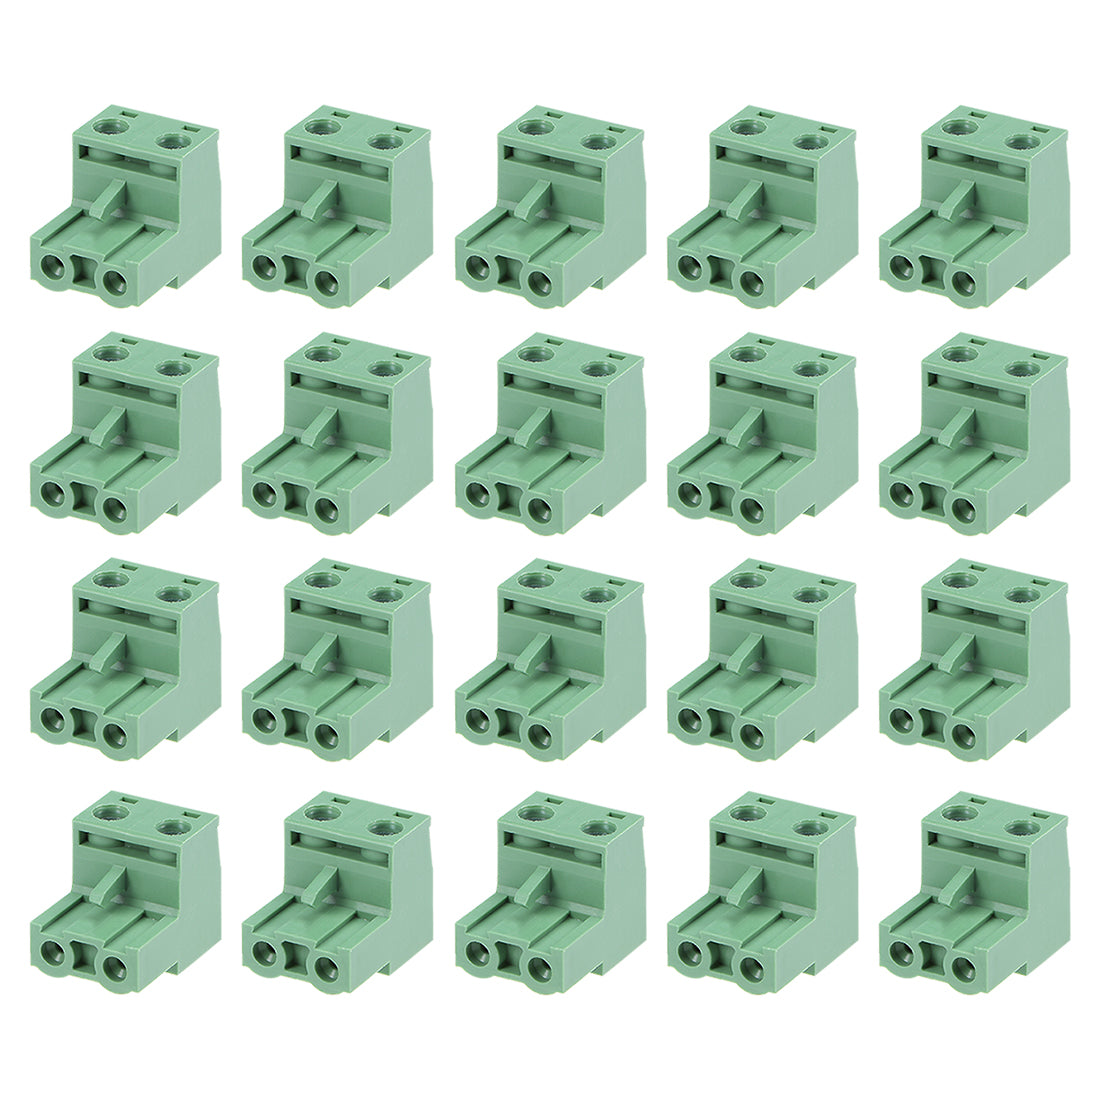 uxcell Uxcell 20Pcs AC300V 15A 7.62mm Pitch 2P Flat Angle Needle Seat Insert-In PCB Terminal Block Connector green